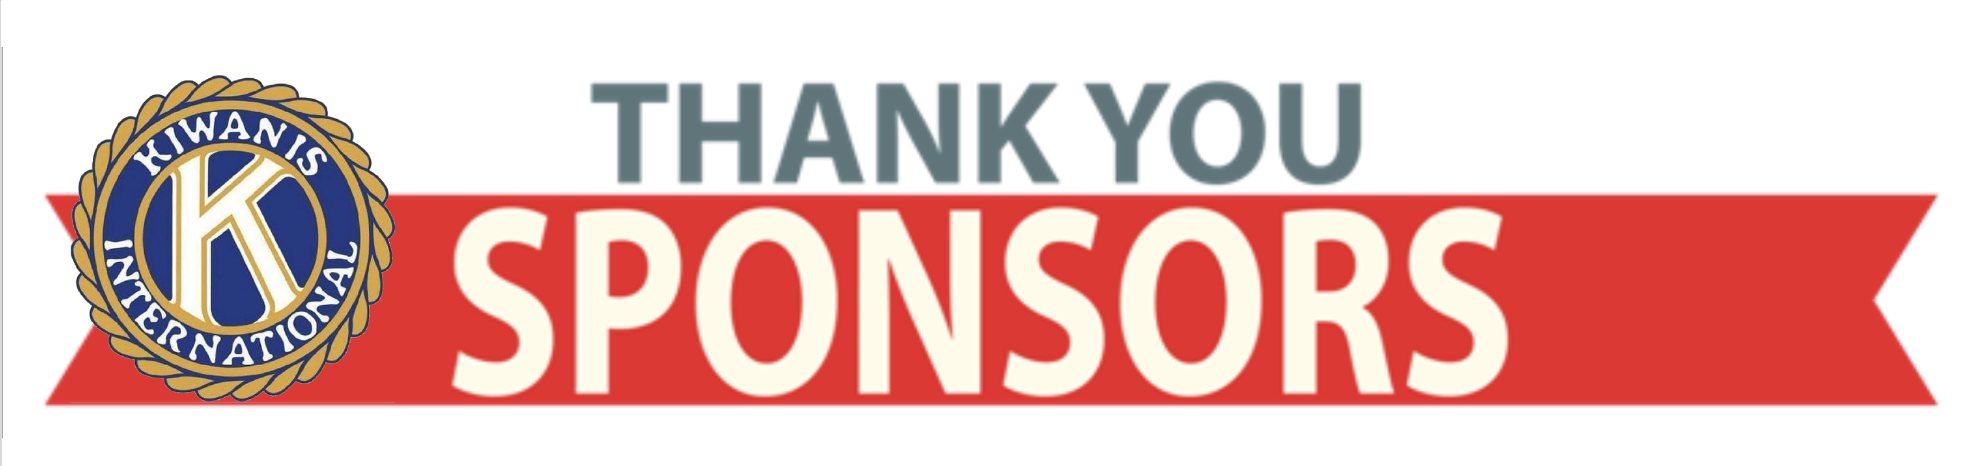 Click to see our generous sponsors.